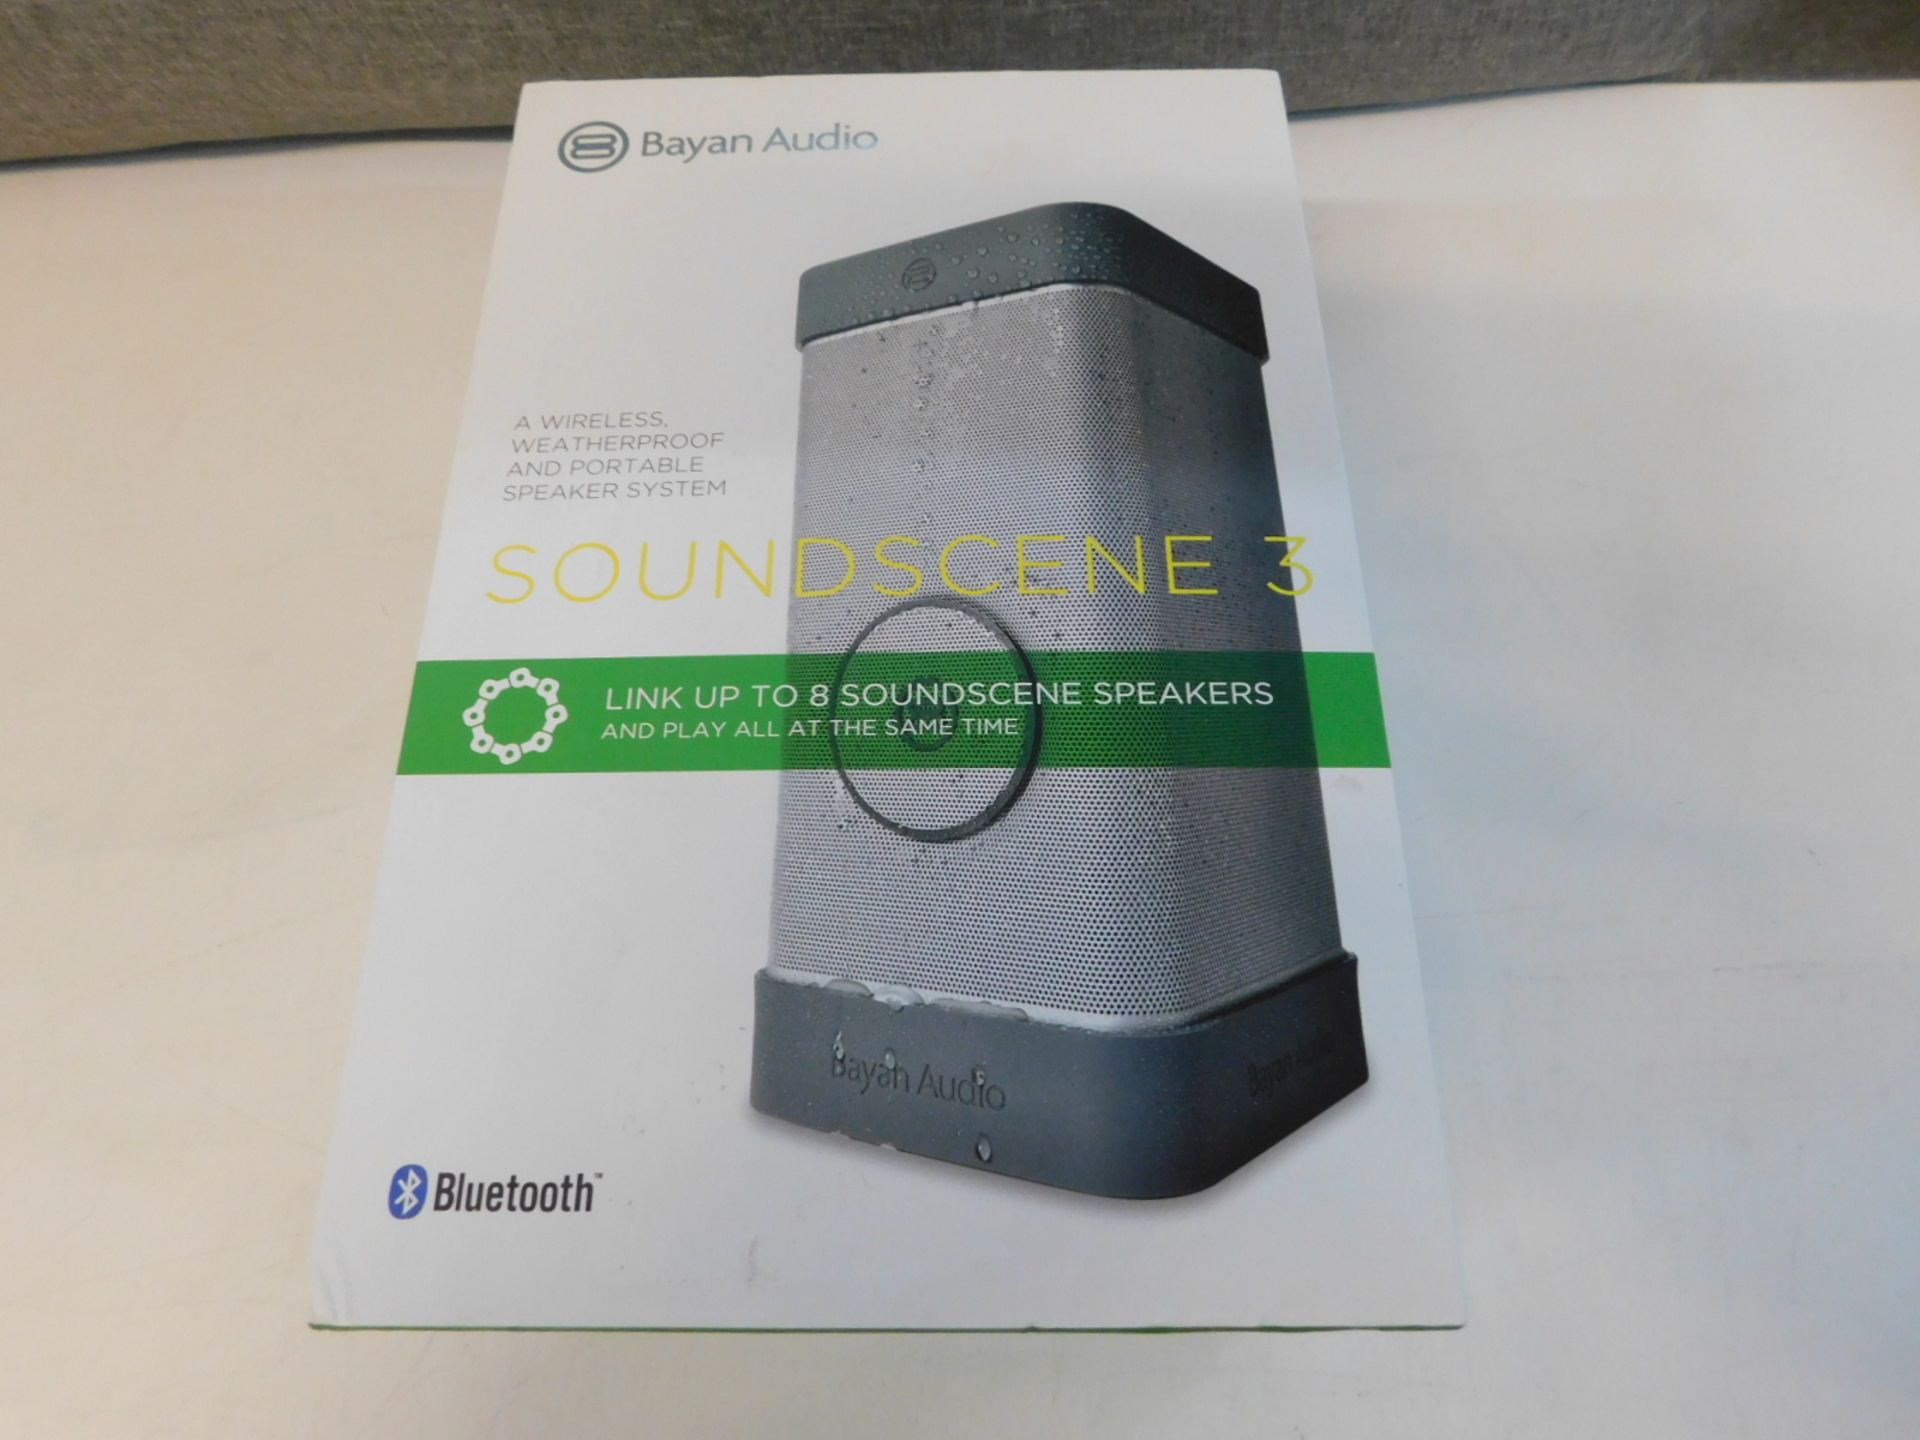 1 BOXED BAYAN AUDIO SOUNDSCENE 3 WIRELESS AND PORTABLE SPEAKER SYSTEM RRP £229